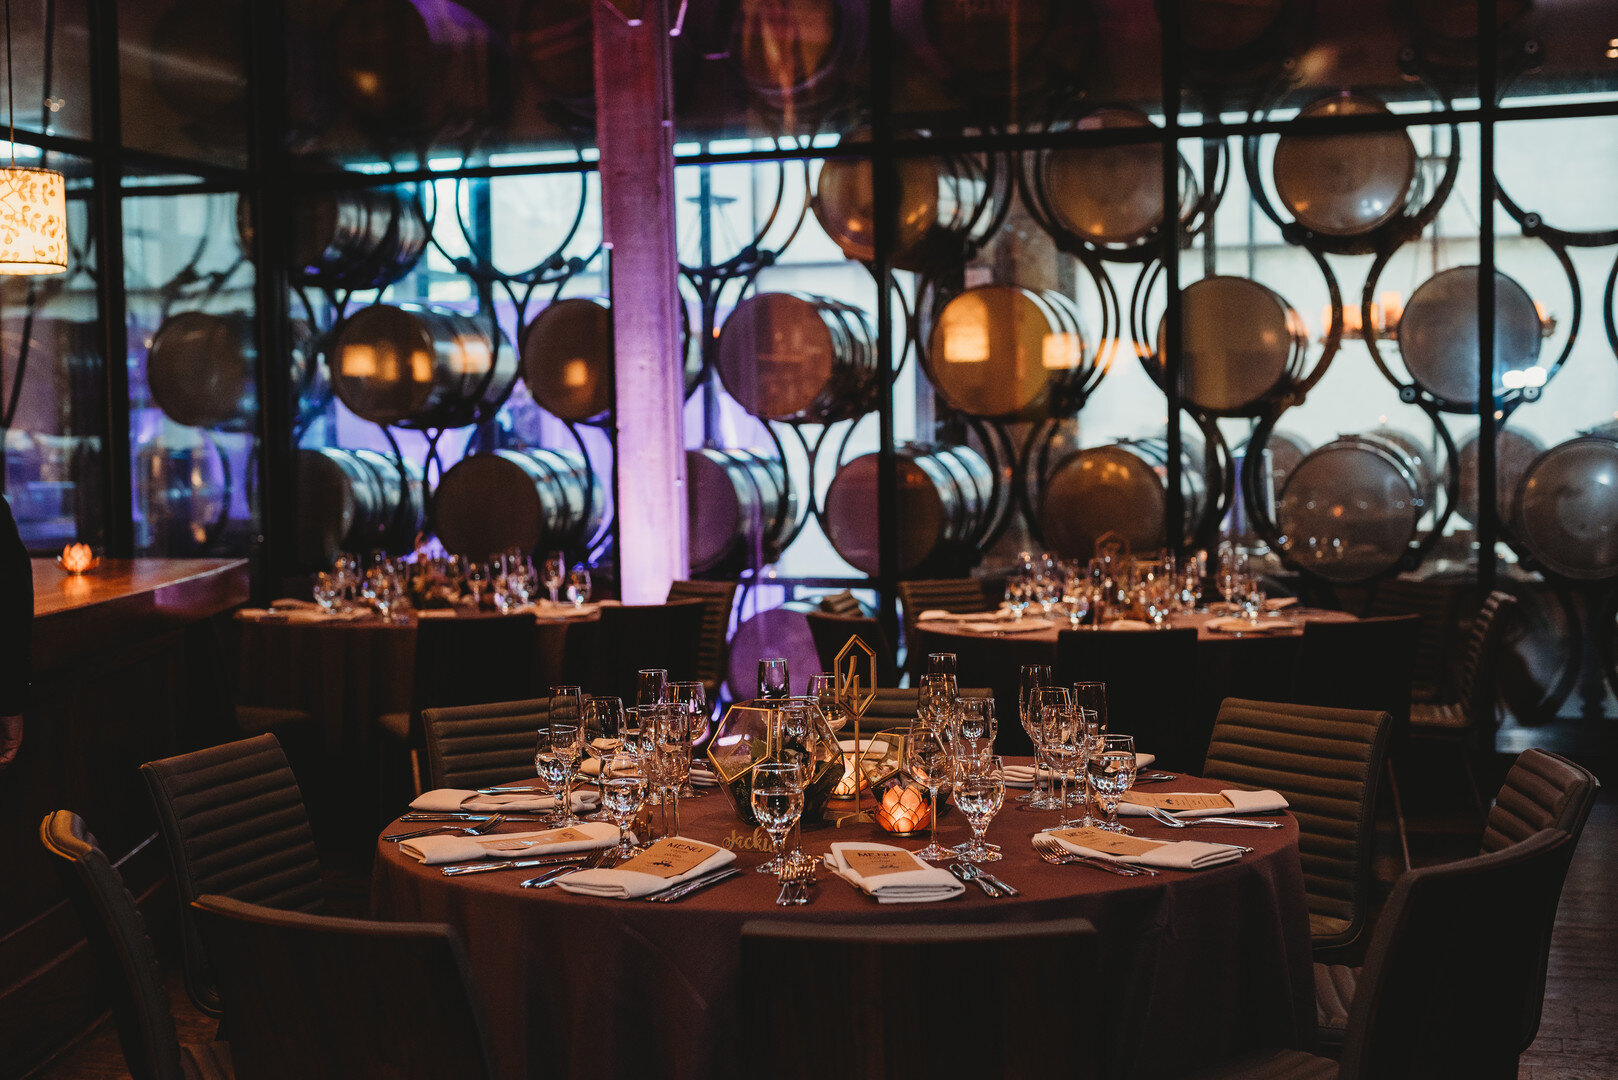 Rustic City Winery Wedding captured by Lisa Kay Creative Photography featured on CHI thee WED!